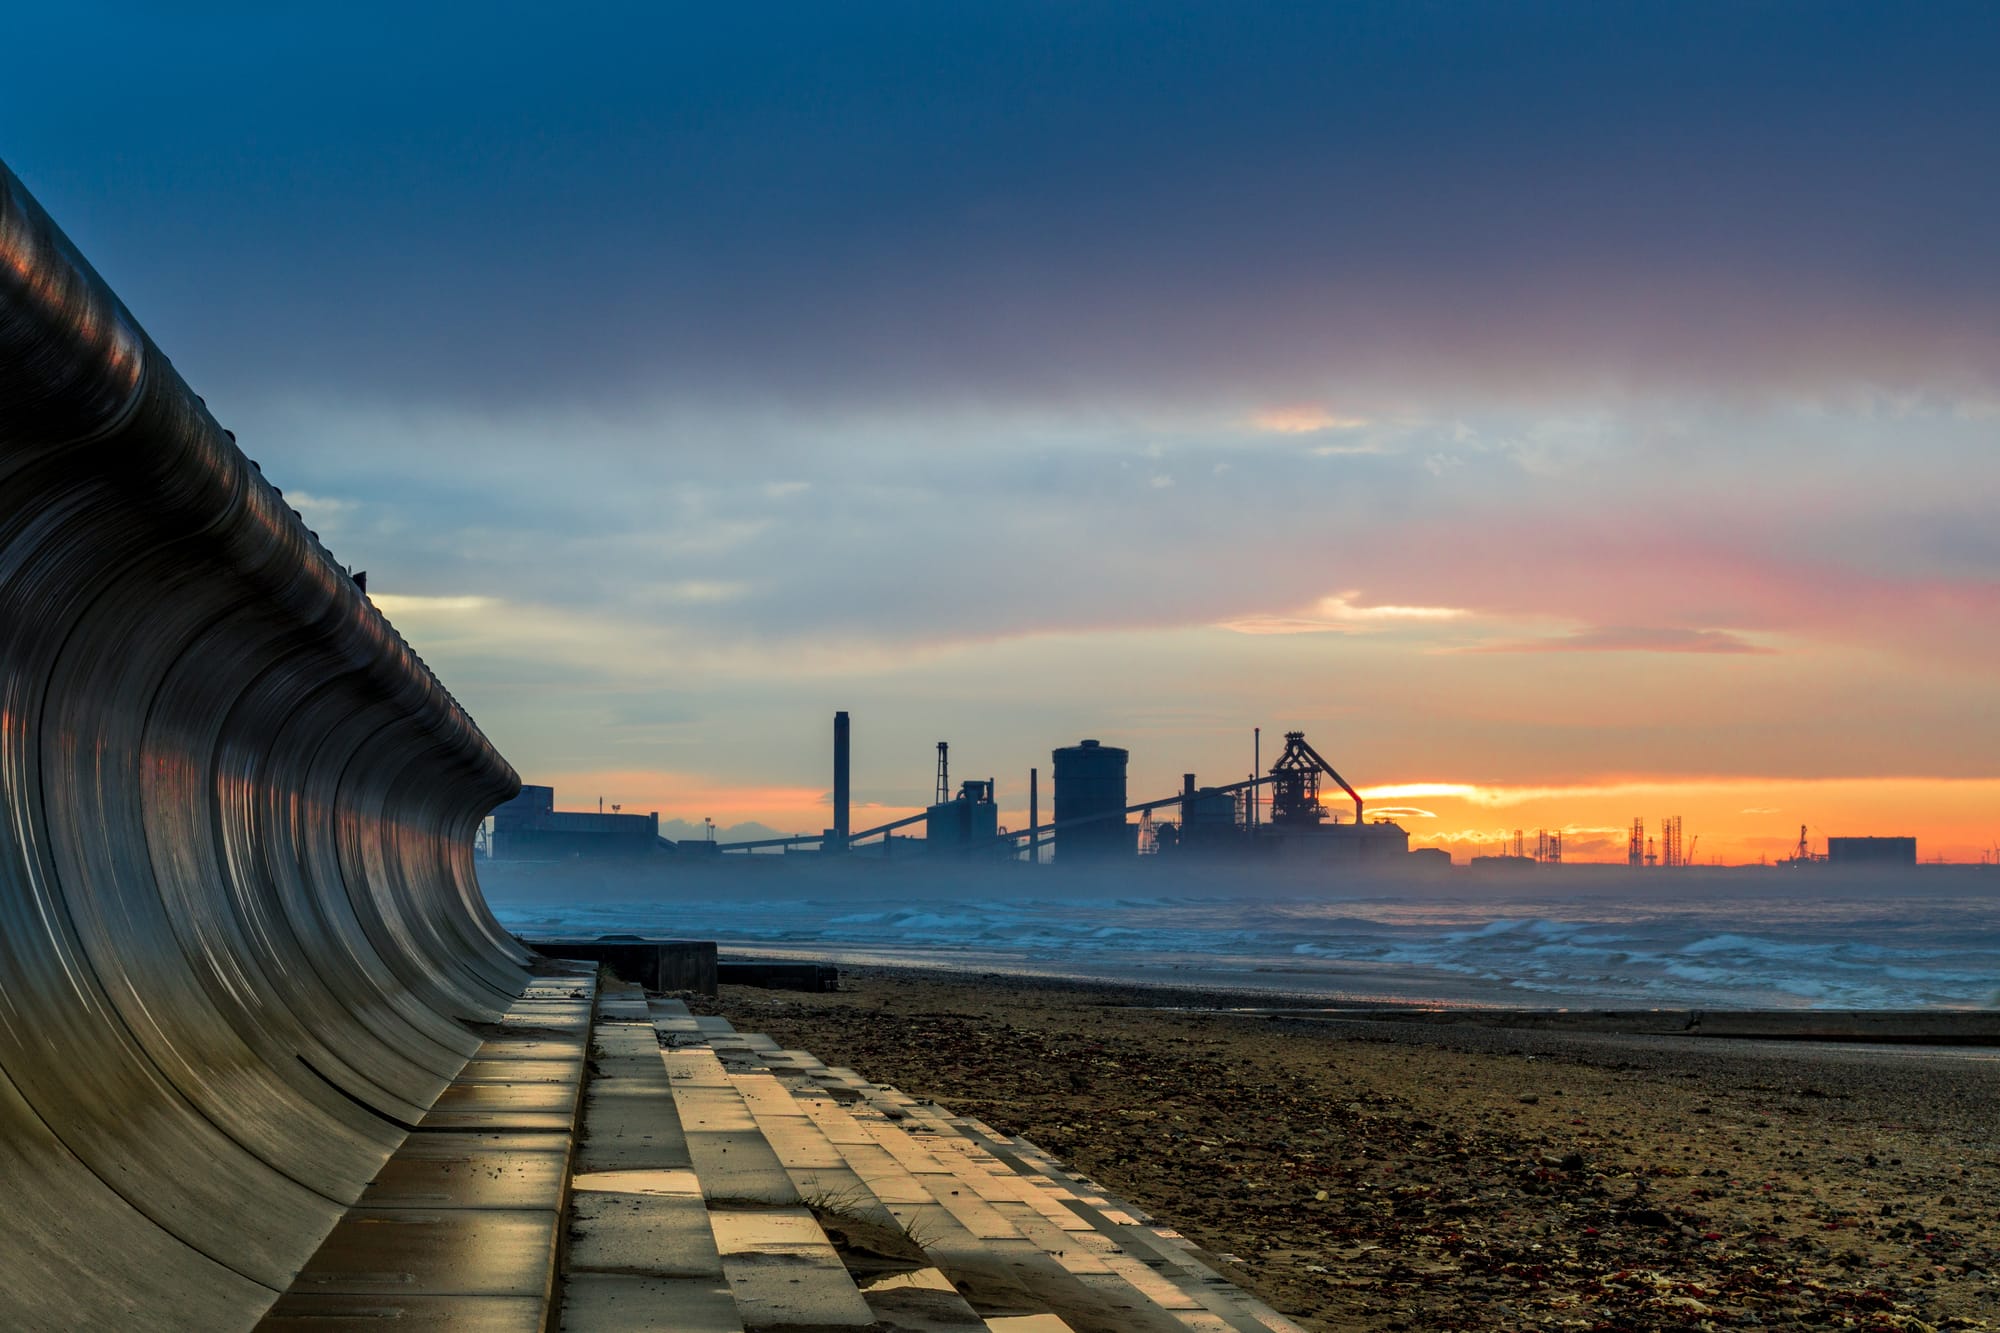 Things to Do in Redcar: A Visitor's Guide to the Coastal Town's Highlights